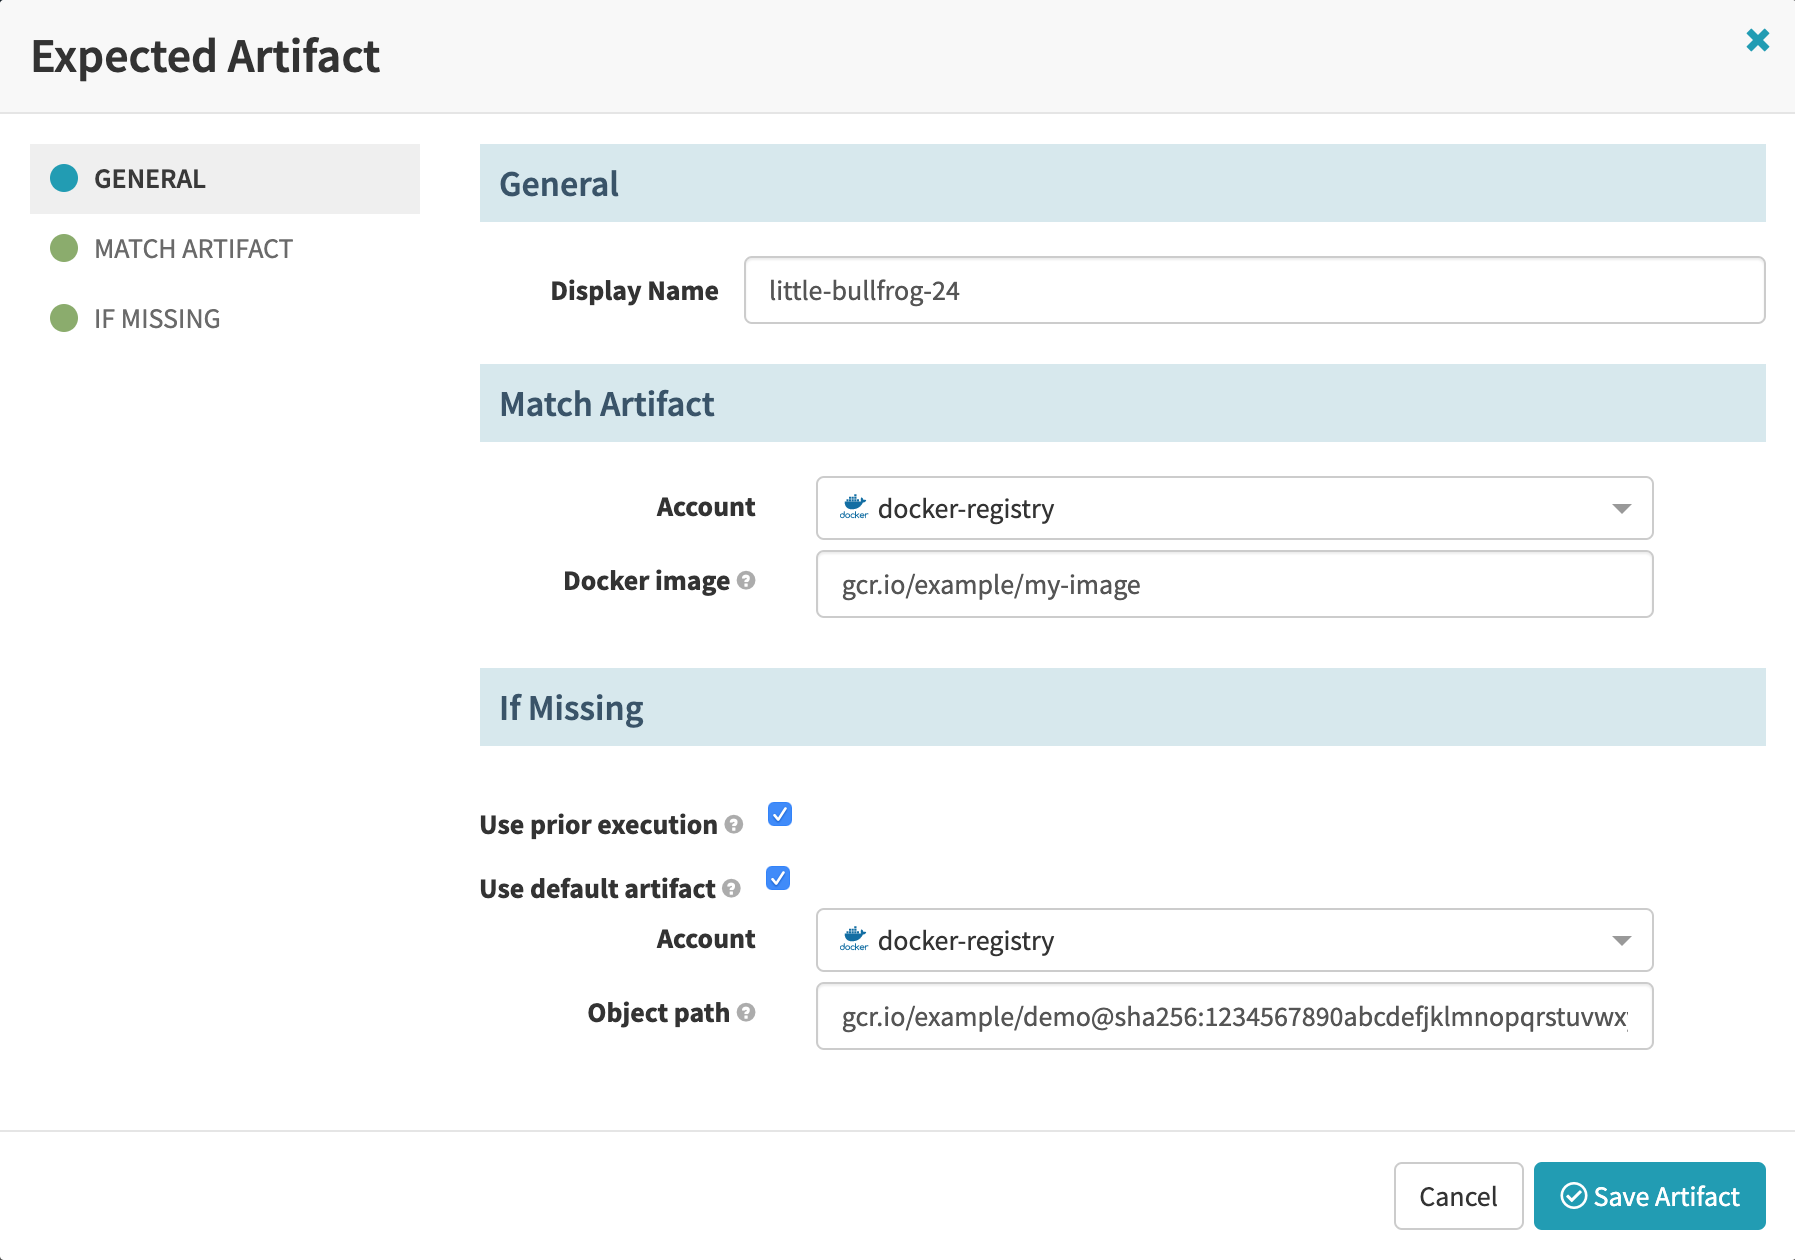 Configuring Docker image fields in a pipeline trigger&rsquo;s expected artifact settings.